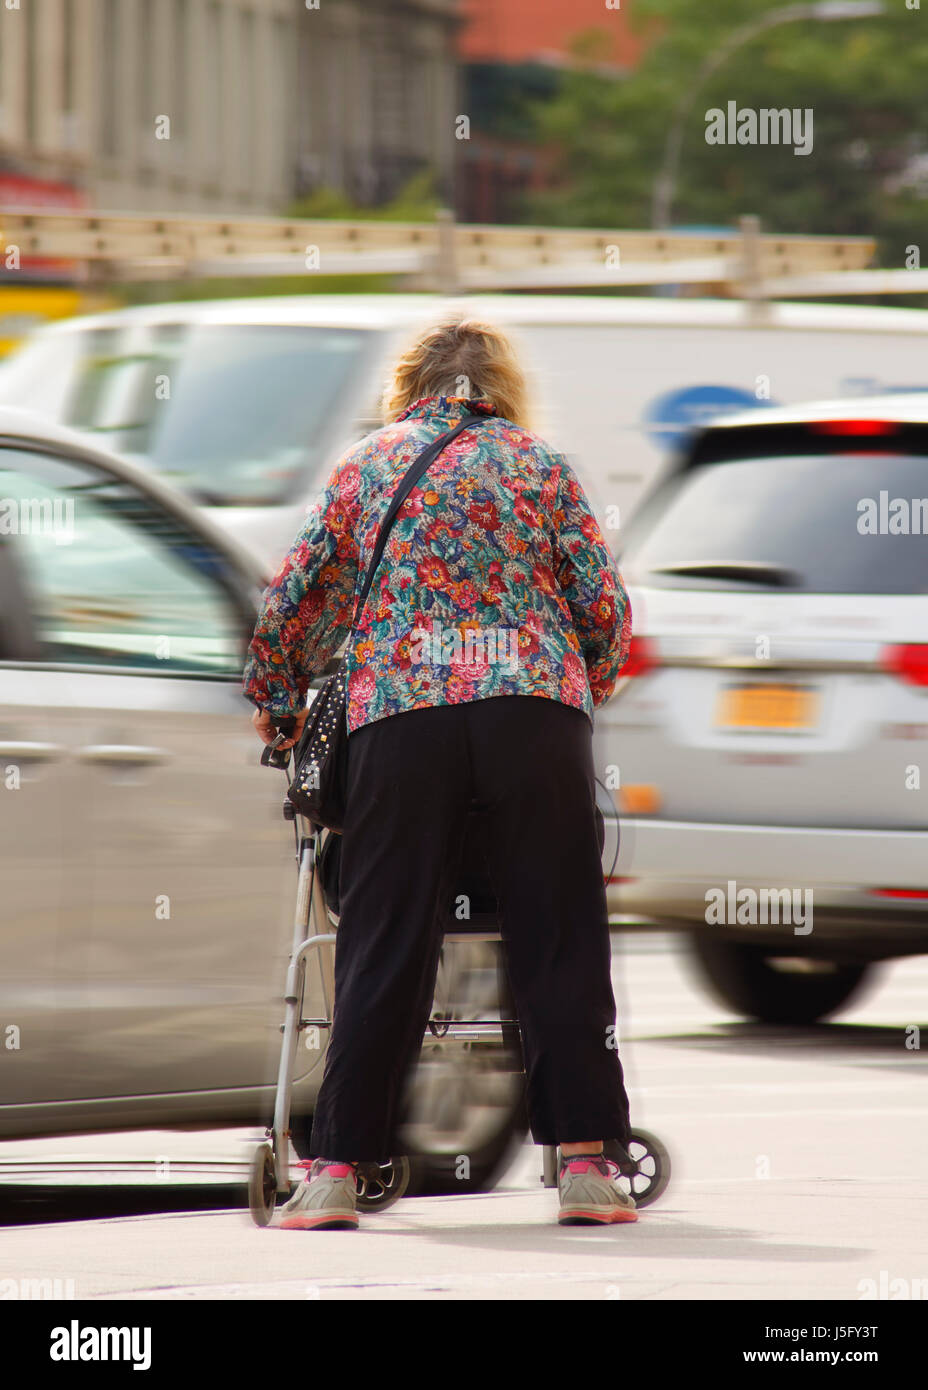 A frail elder women attempting to cross a crowded and busy dangerous street Stock Photo